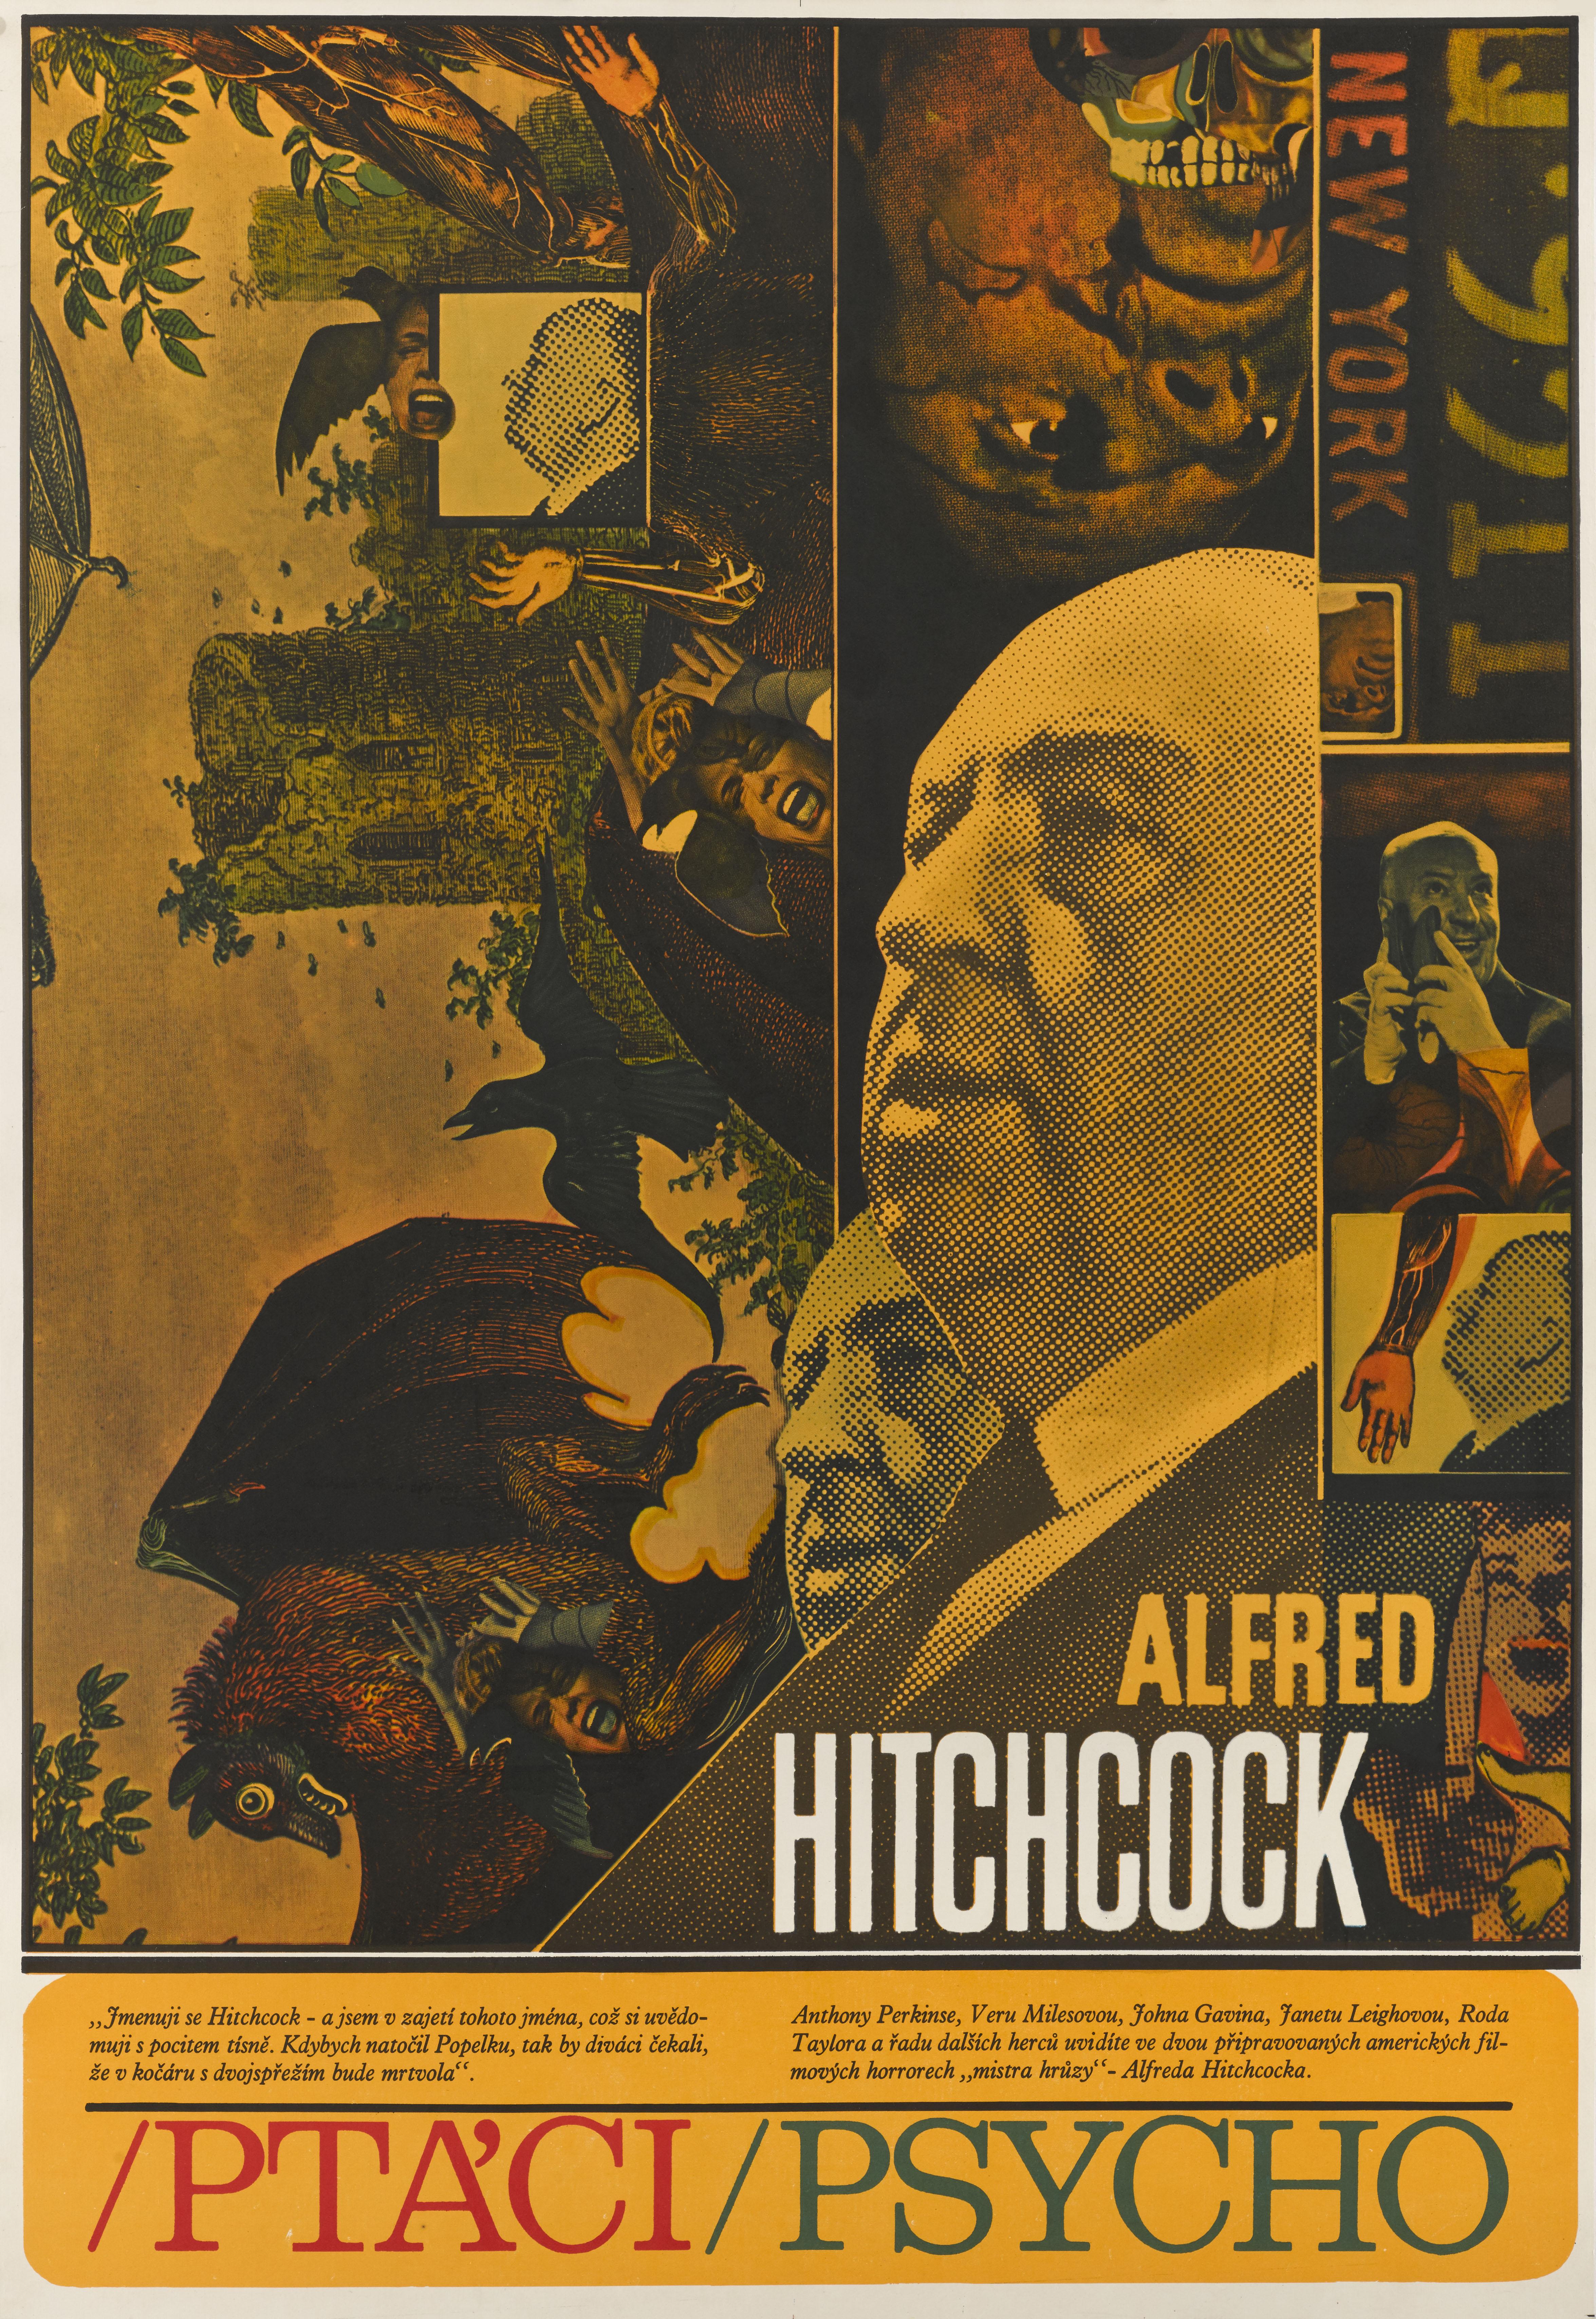 Original Czechoslovakian film poster for the double bill release of The Birds and Psycho.
This poster was used for the showing of these two classic Hitchcock films in 1970.
The wonderful artwork on this poster is by Zdenek Ziegler (b. 1932)
This